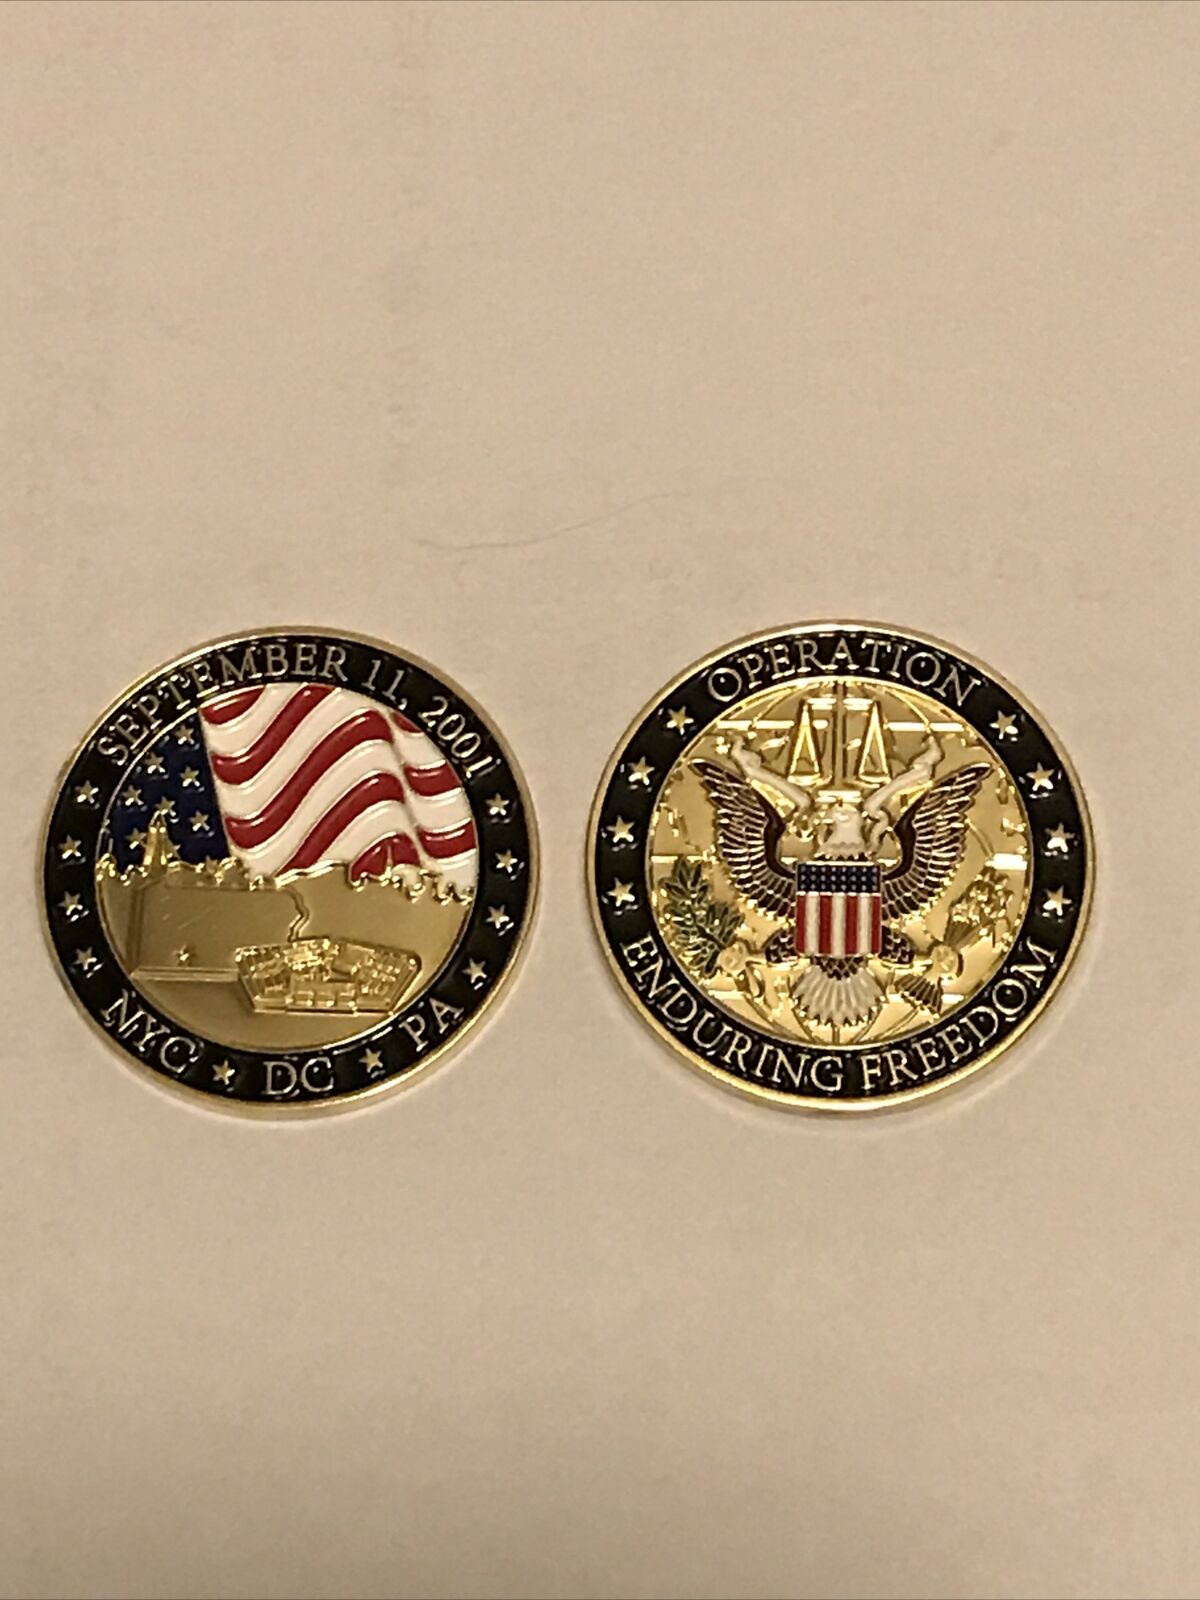 911 World Trade Center Commemorative Coin Operation Enduring Freedom